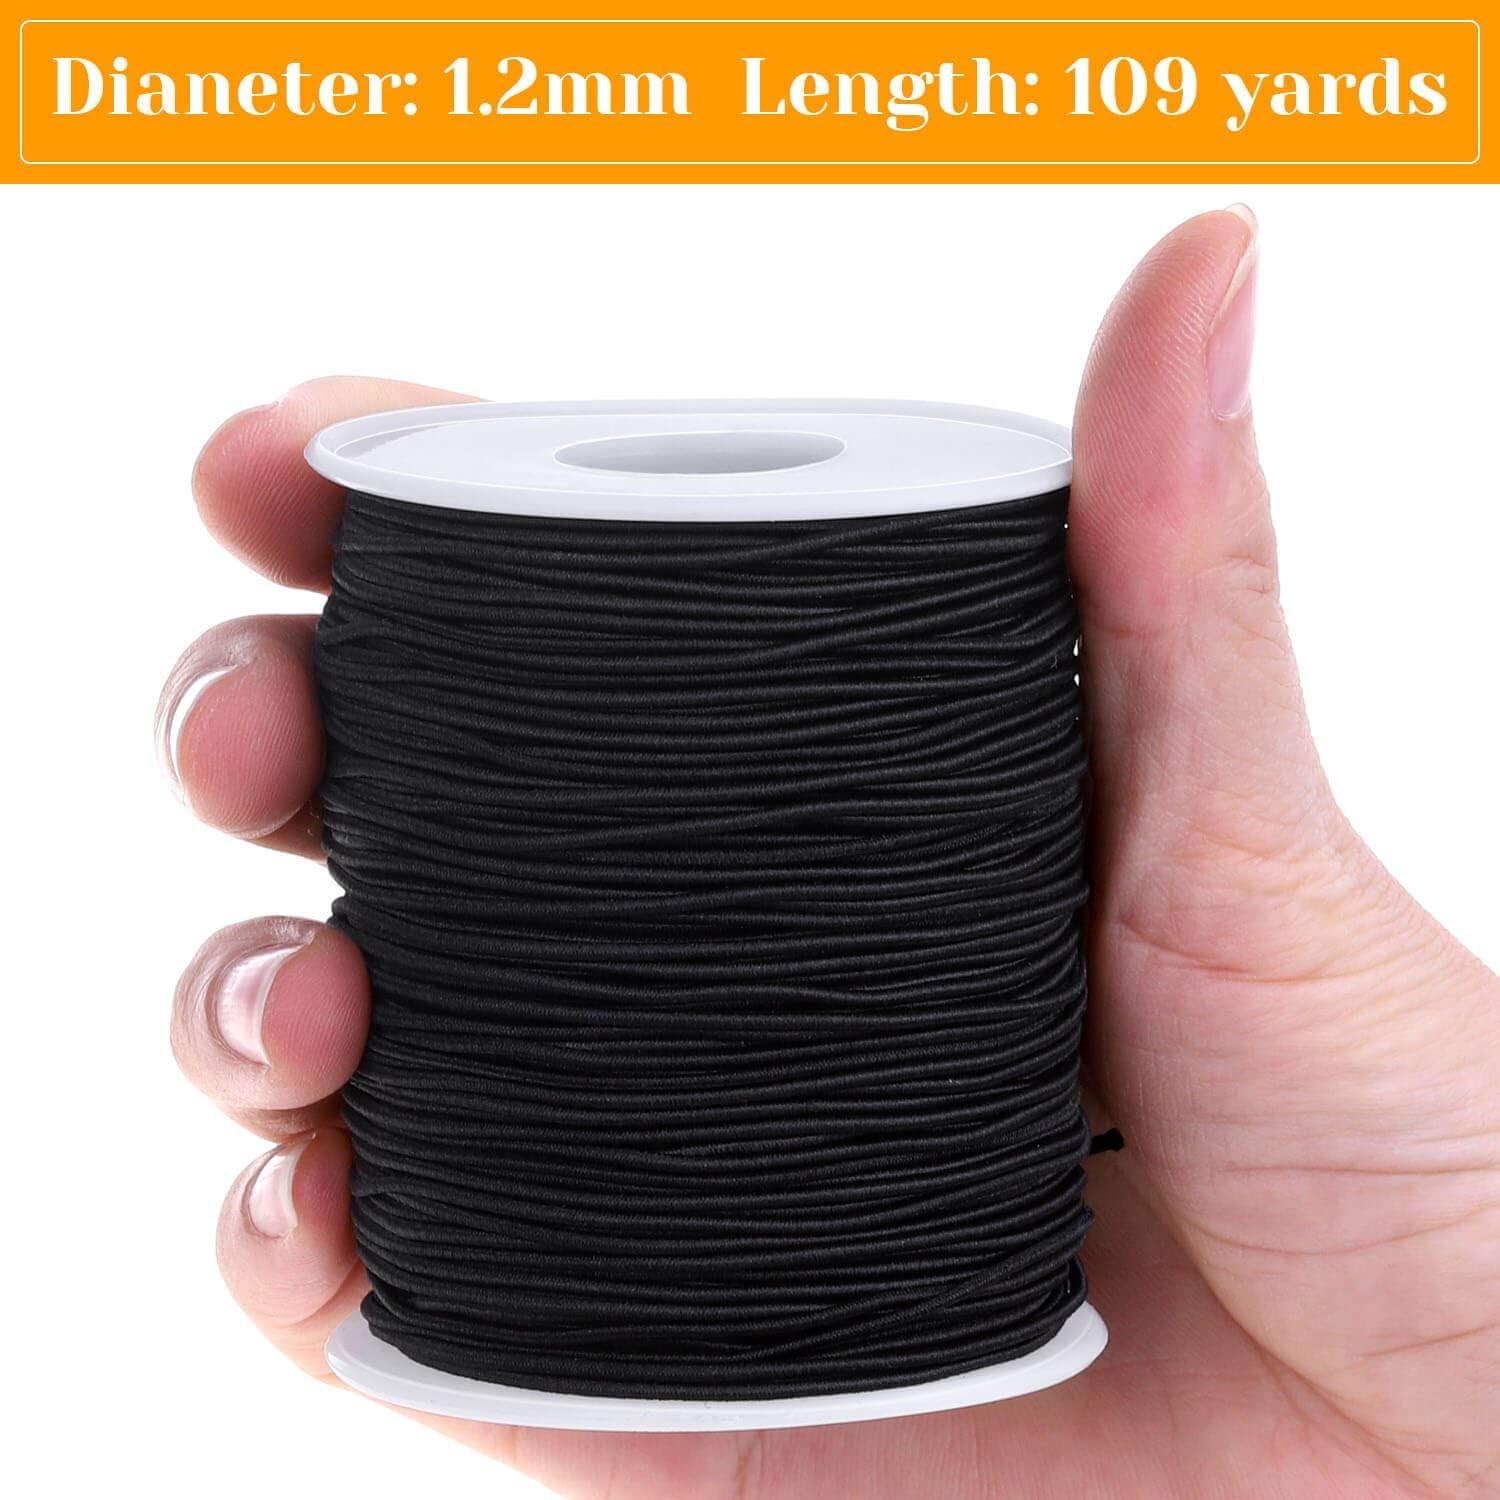 Elastic String for Bracelets Selizo Elastic Cord Jewelry Stretchy